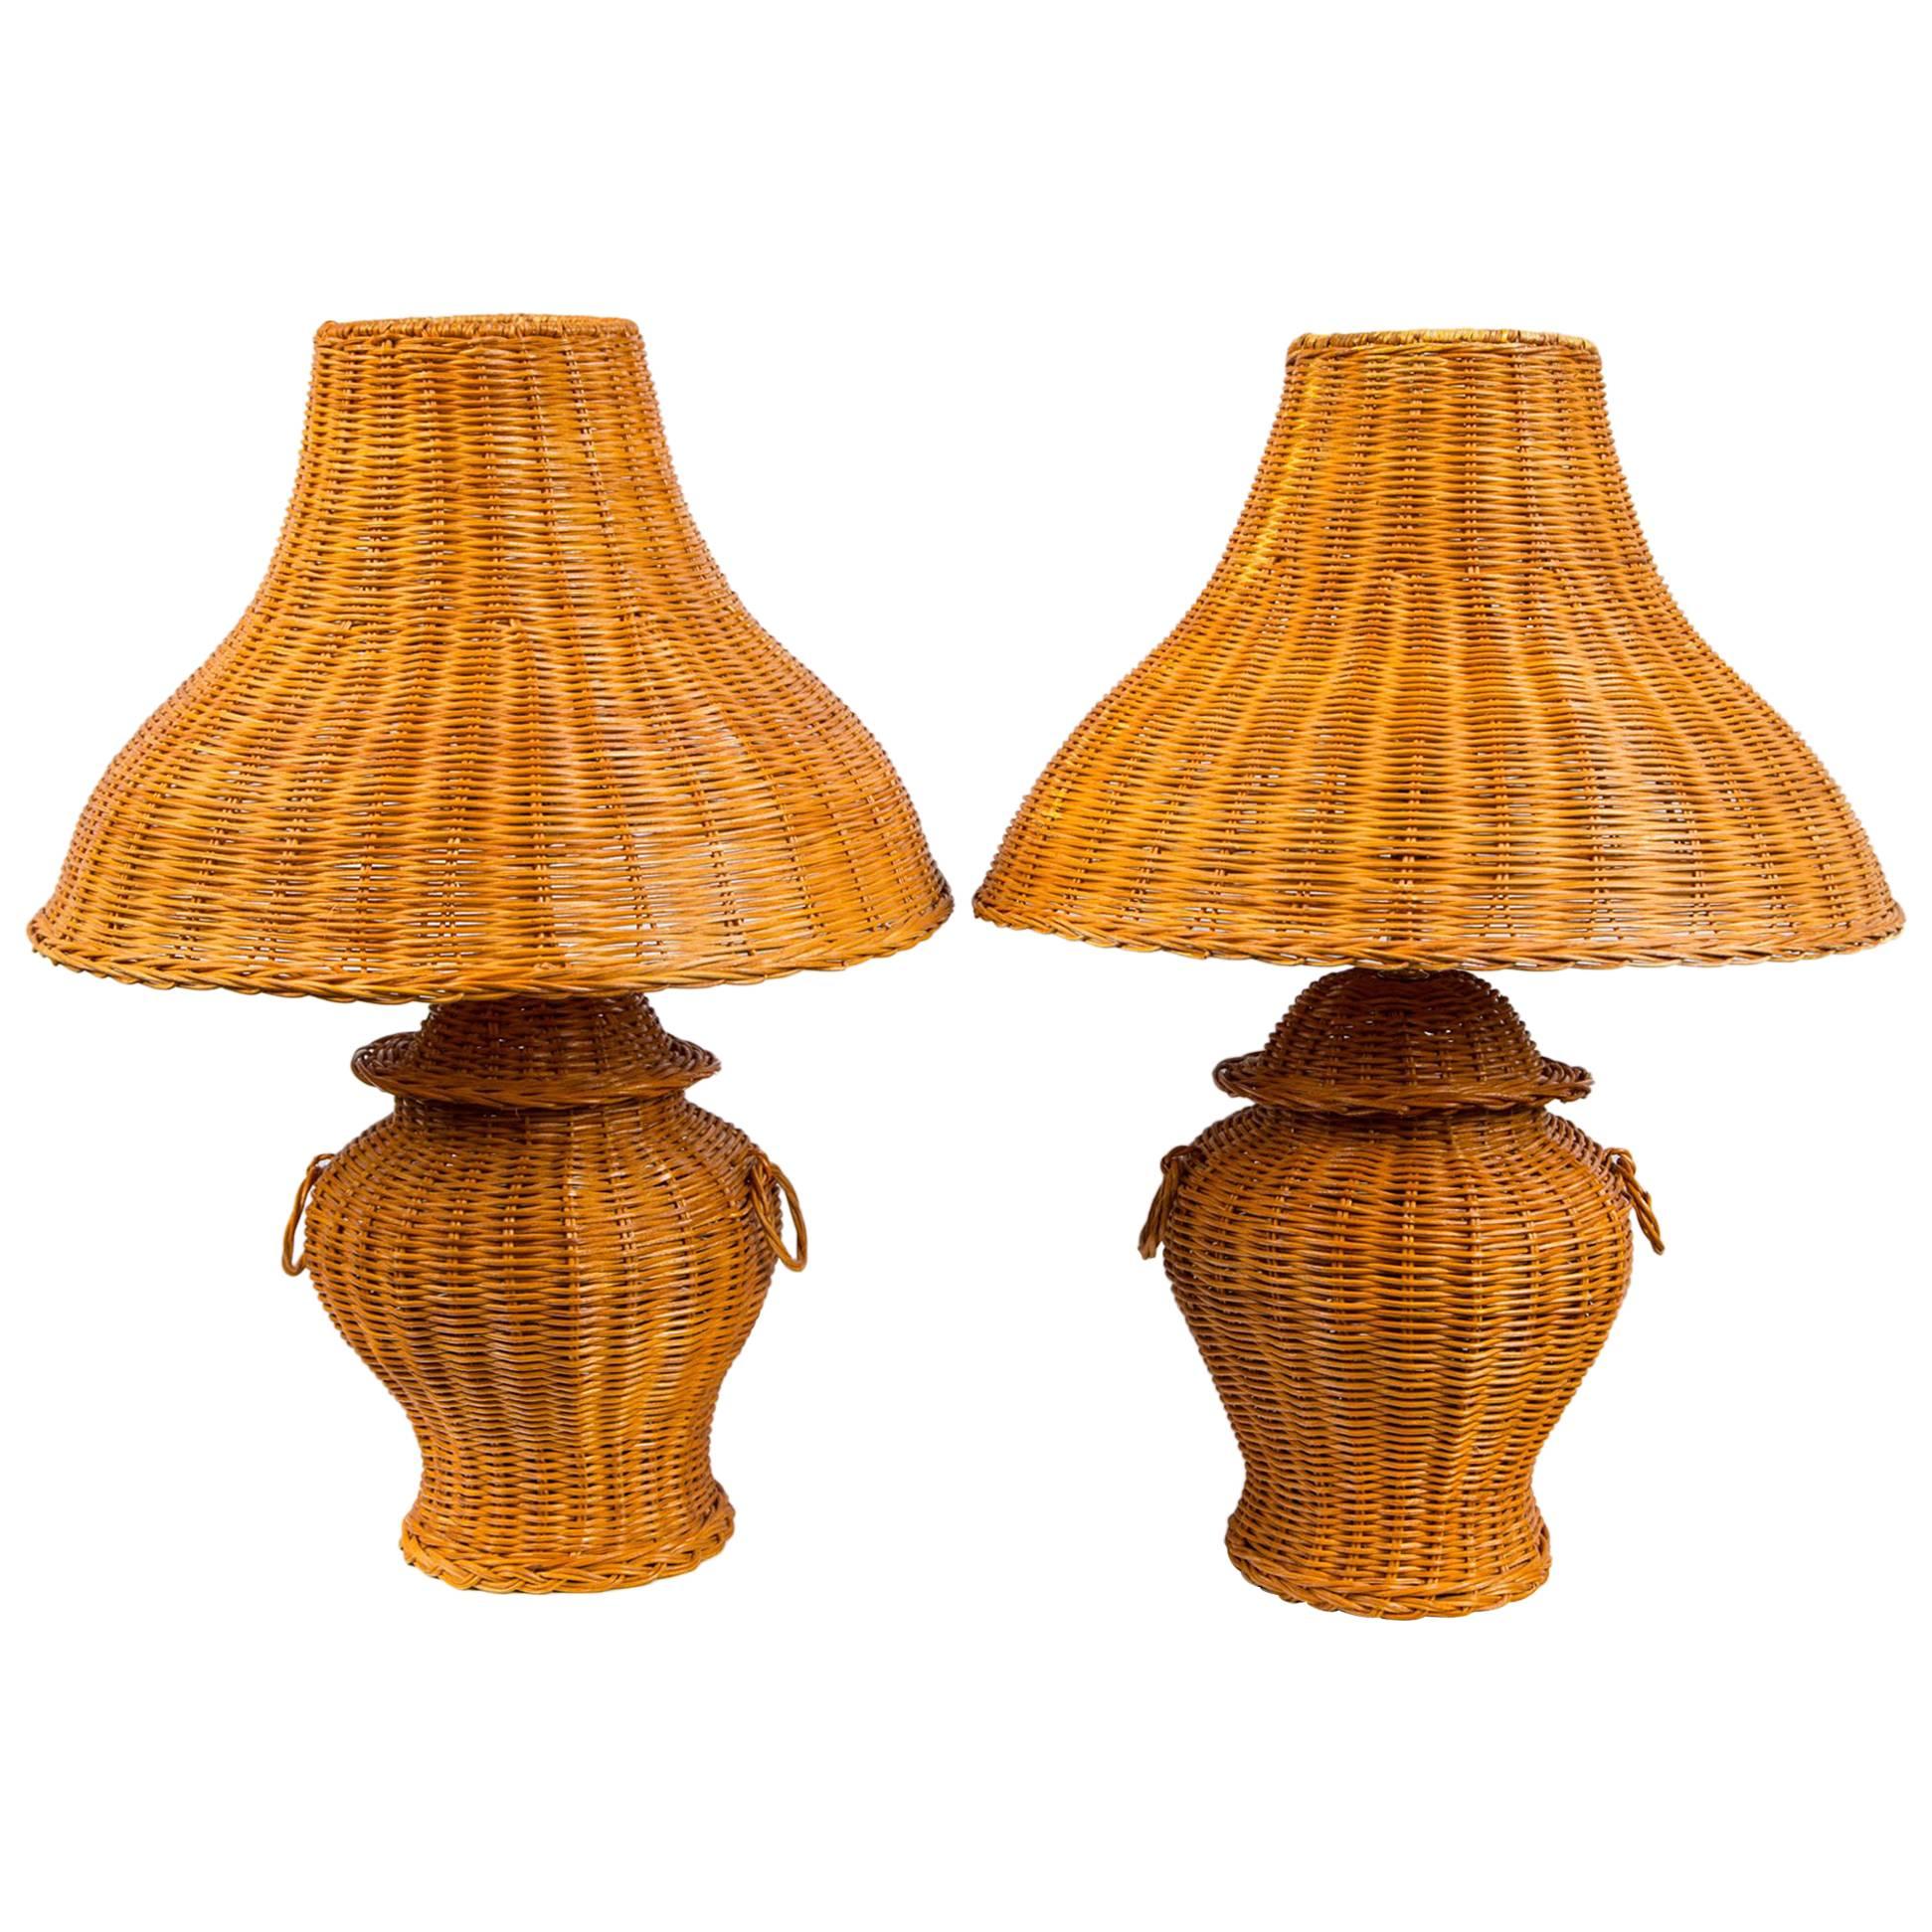 Pair of Natural Wicker Lamps and Shades